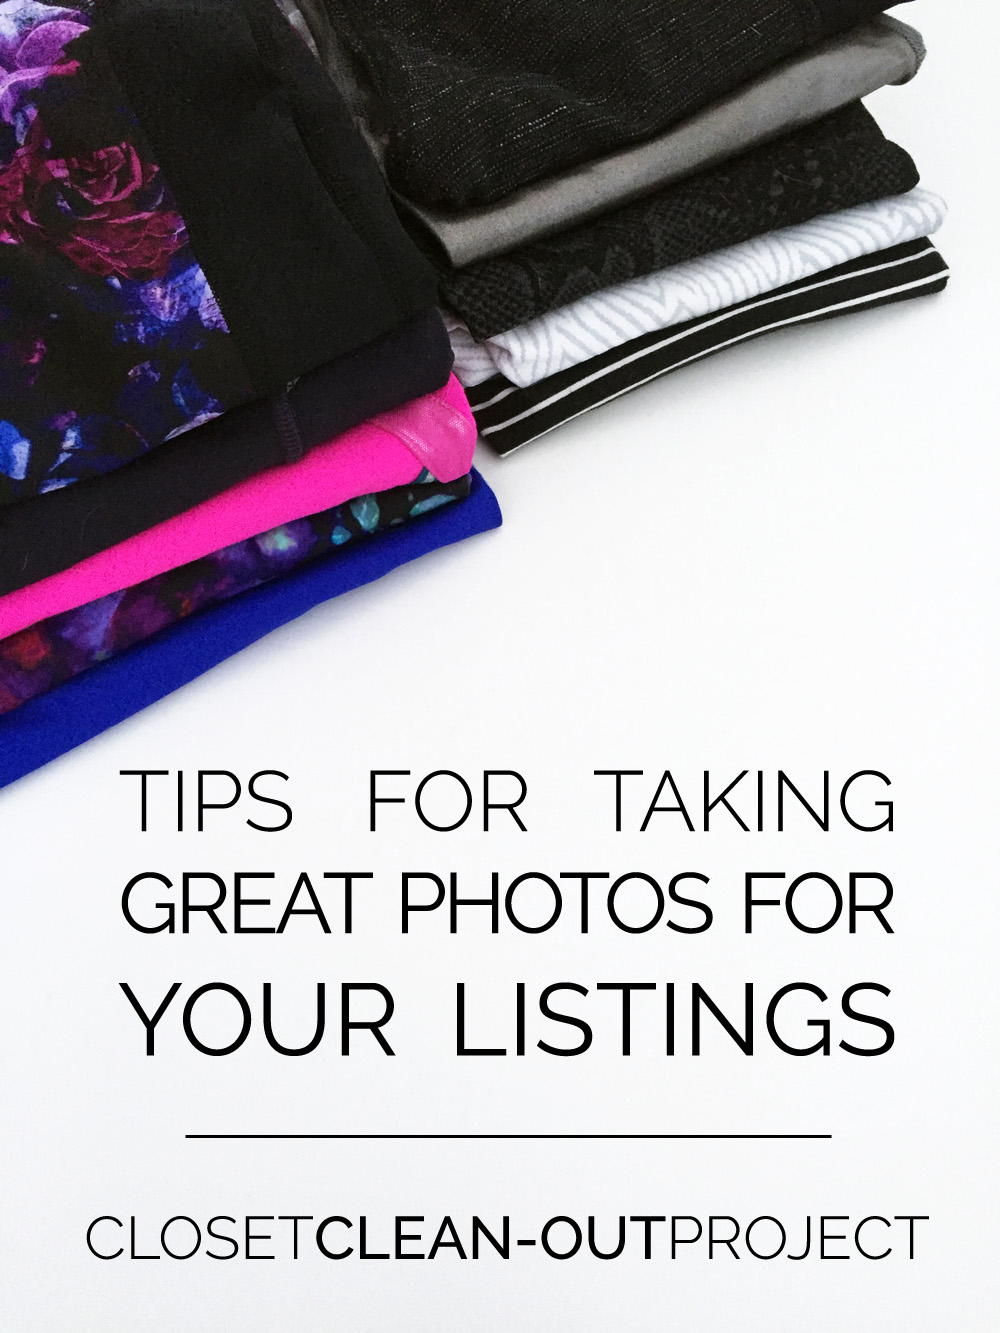 Take photos that sell! Here are some tips on how to boost your online sales with great photos.